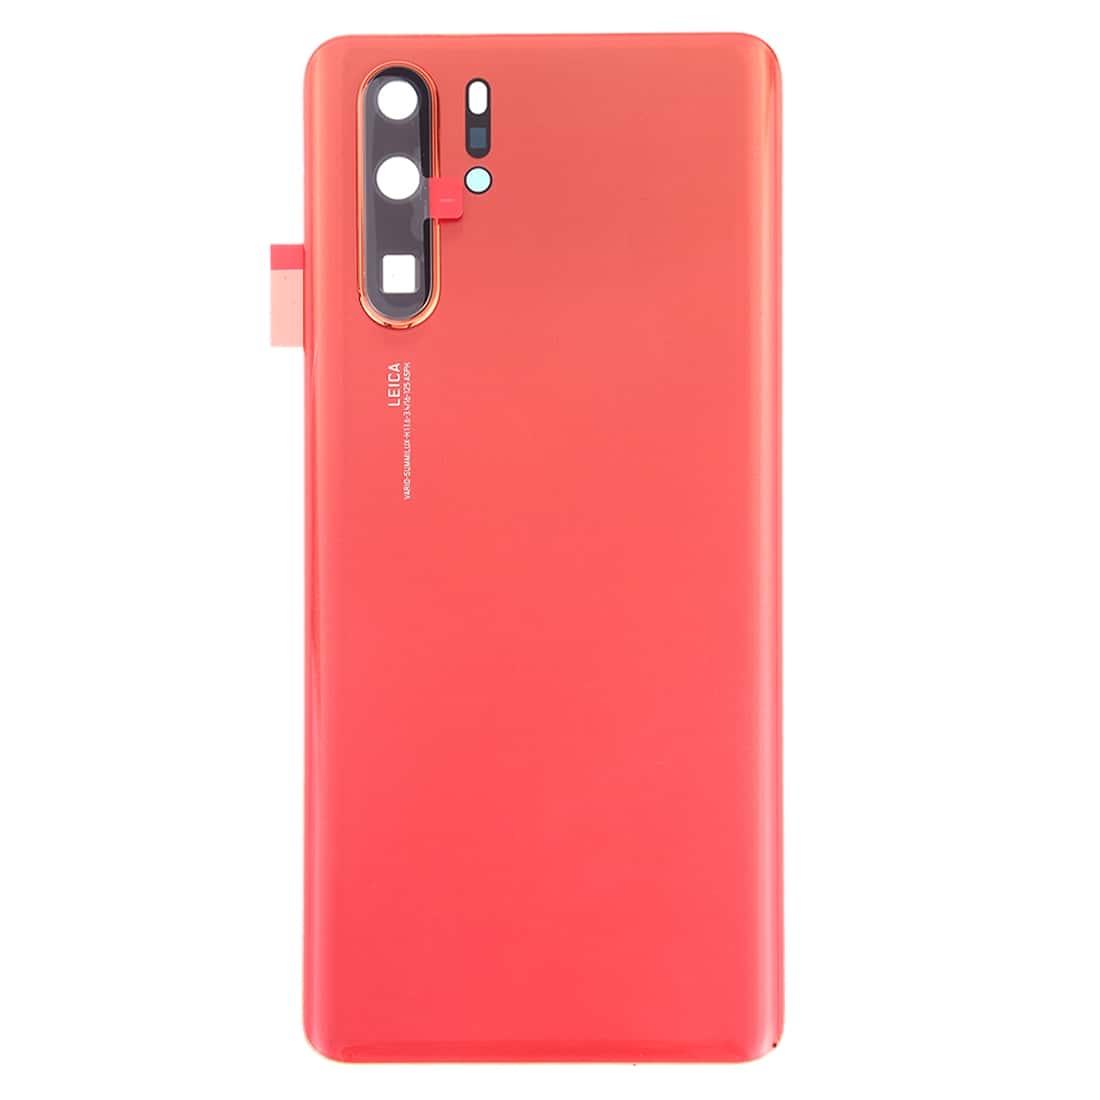 Back Glass Panel for Huawei P30 Pro Orange with Camera Lens